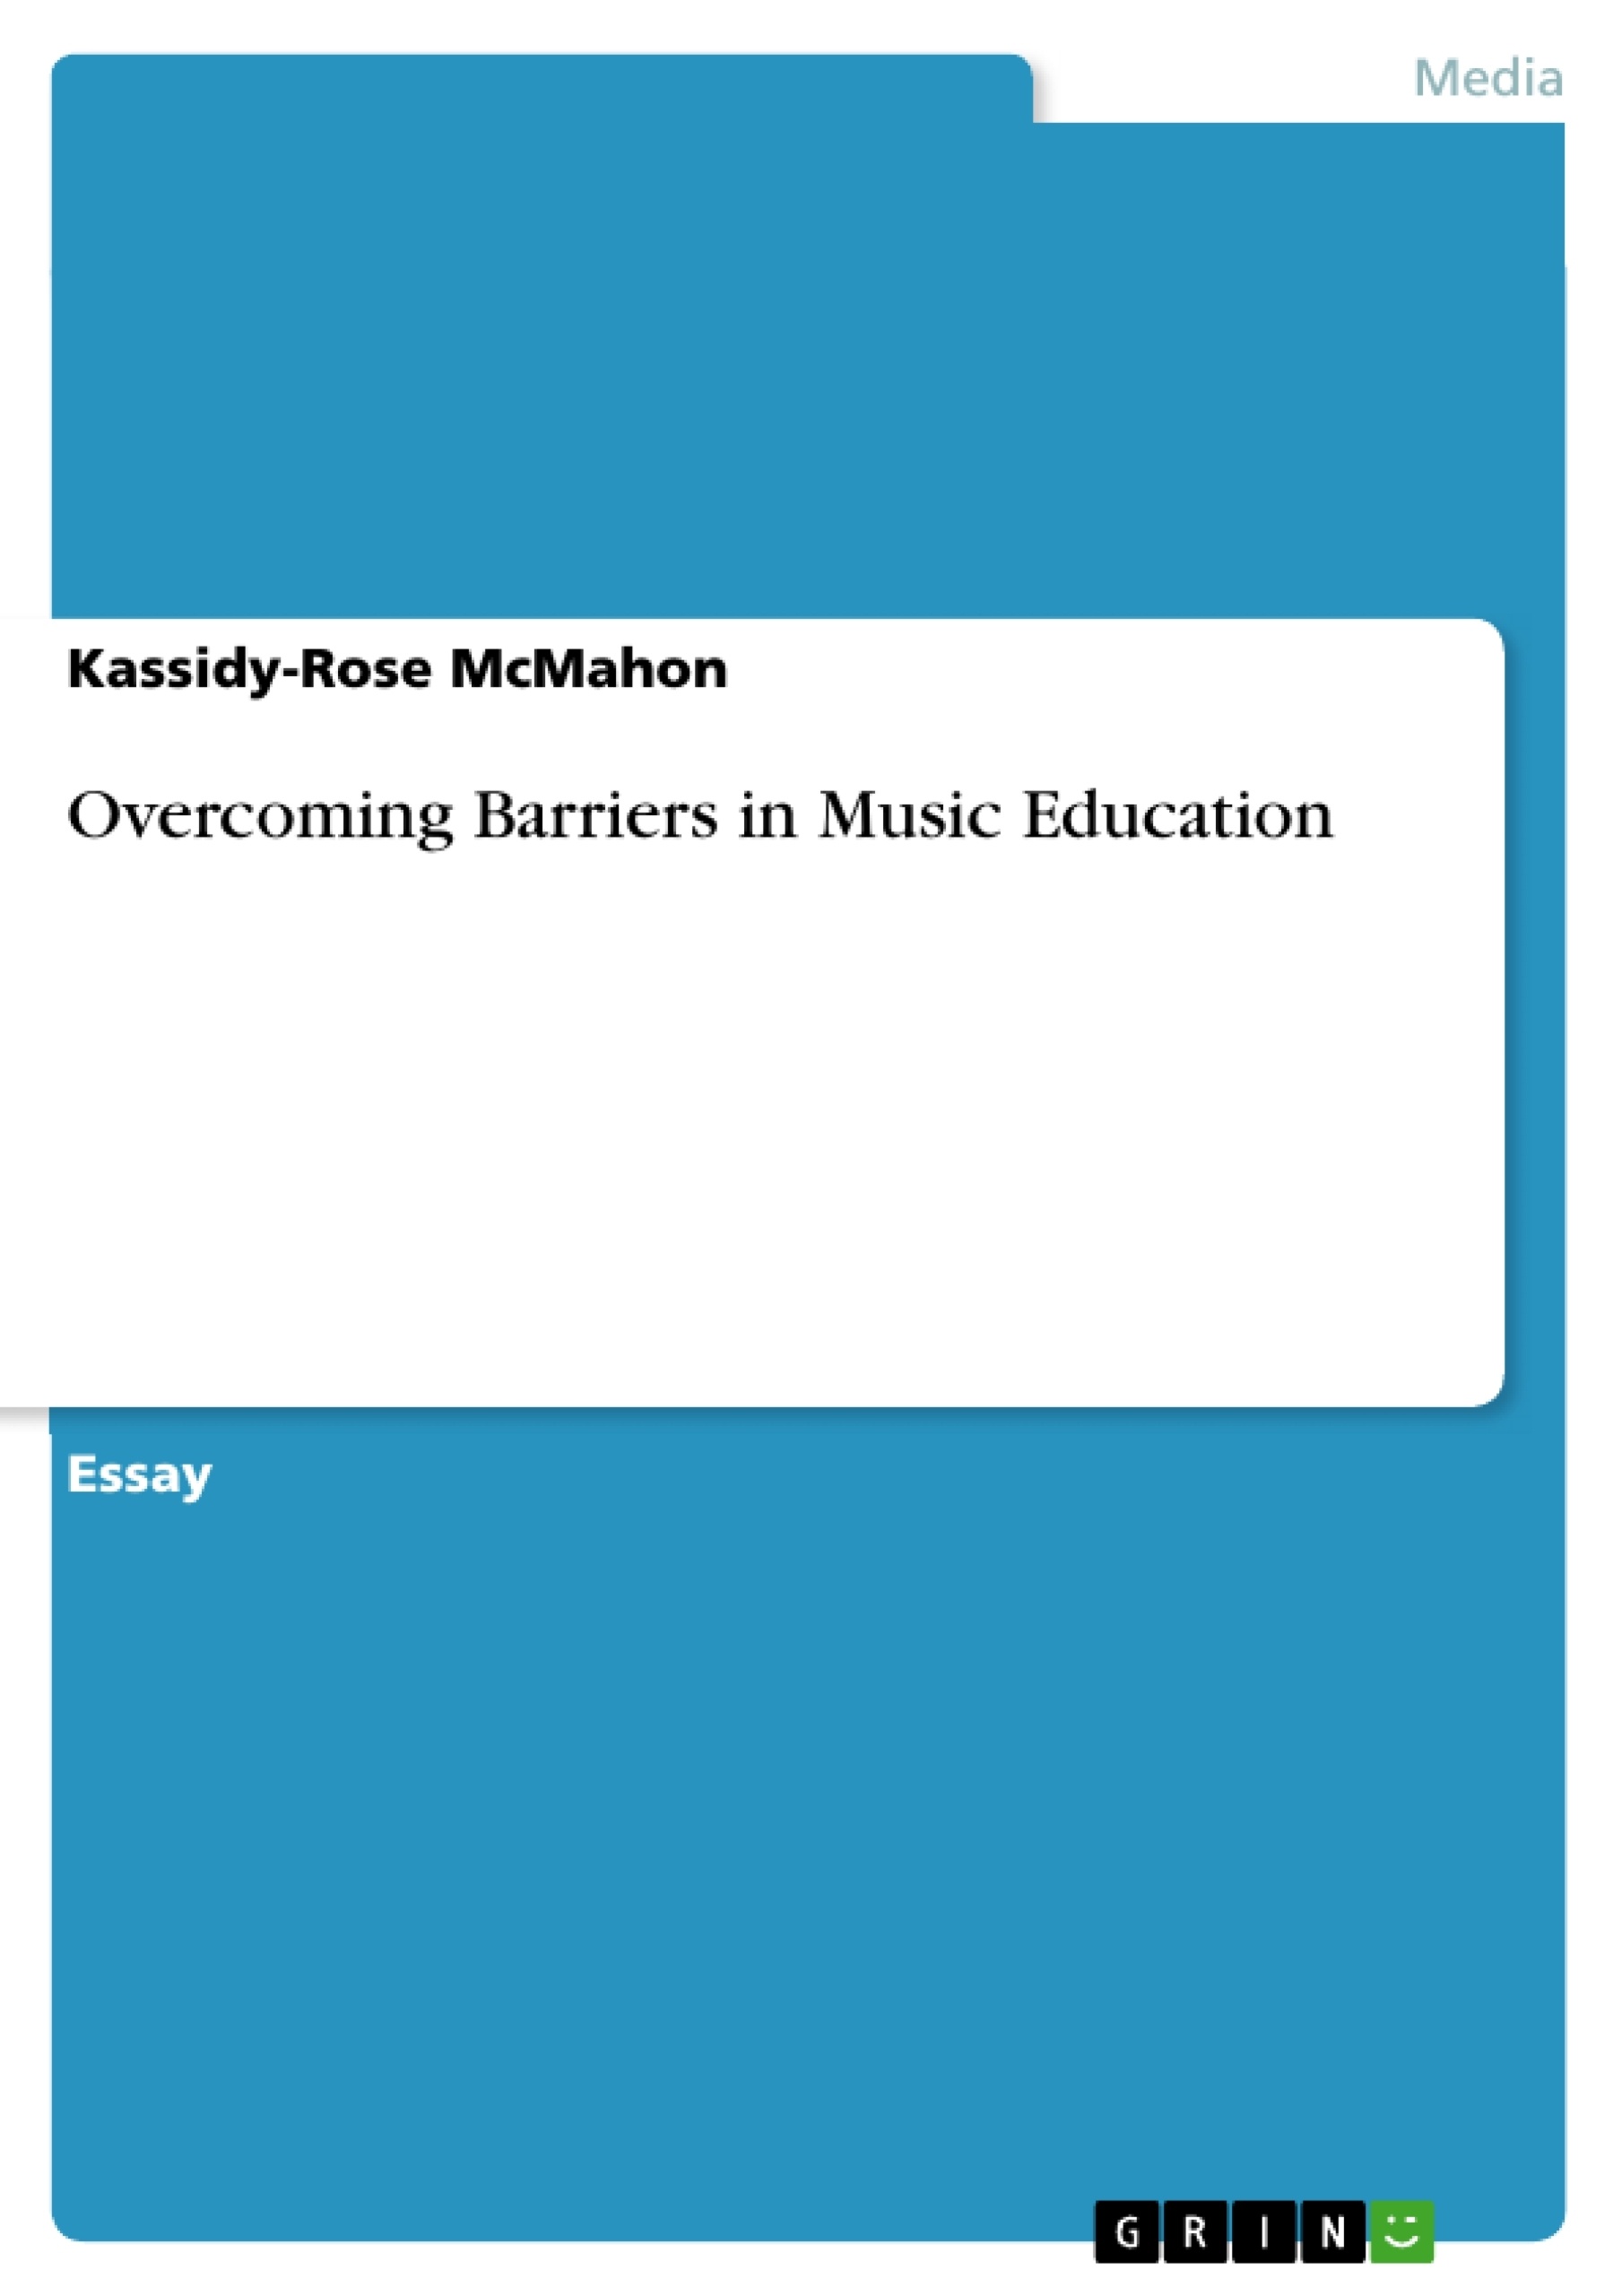 Title: Overcoming Barriers in Music Education